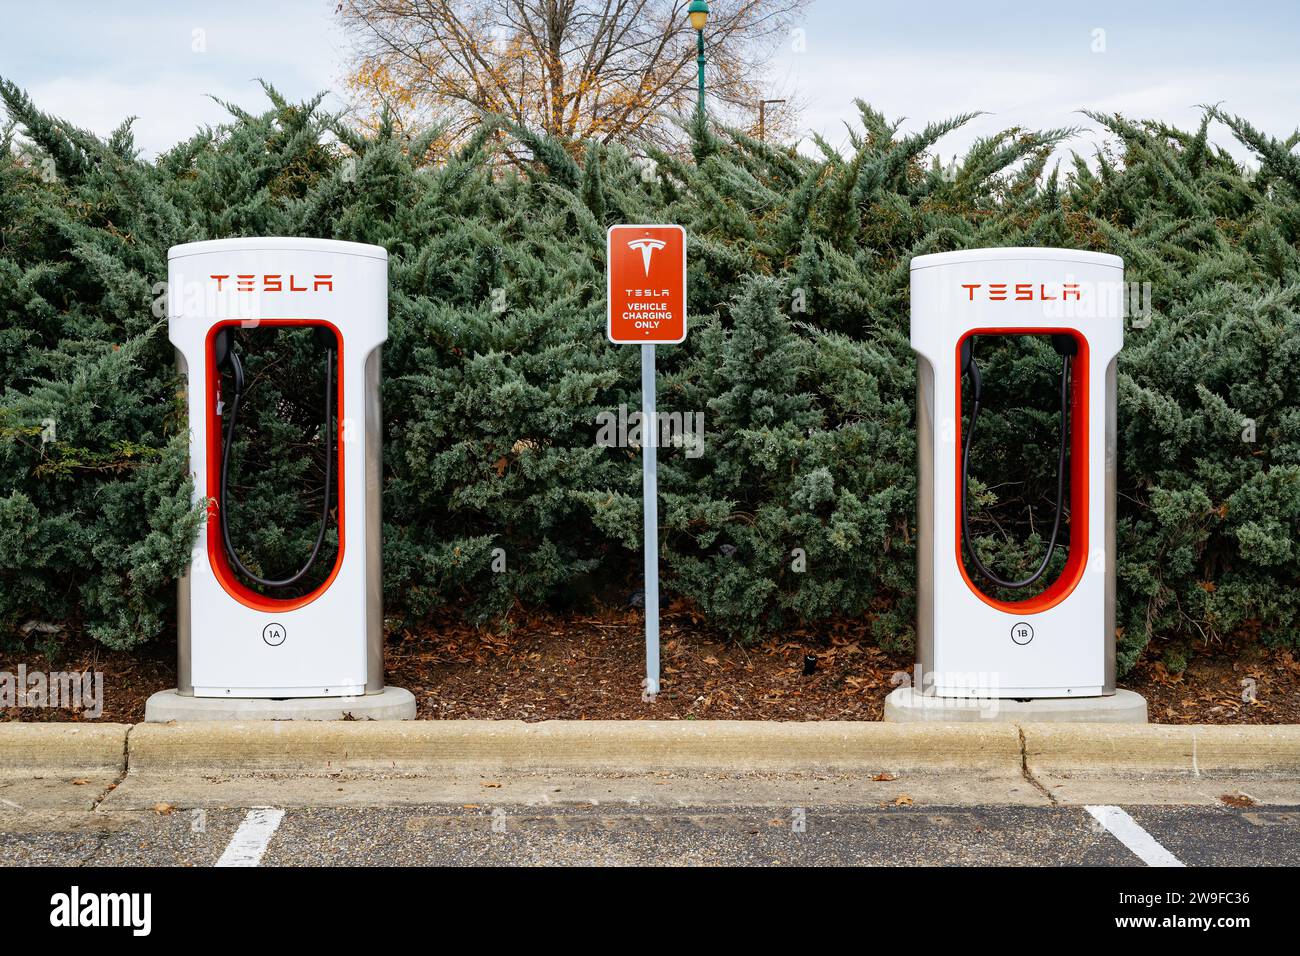 Tesla electric car charging stations for eco friendly cars in a shopping center parking lot in Montgomery Alabama, USA. Stock Photo